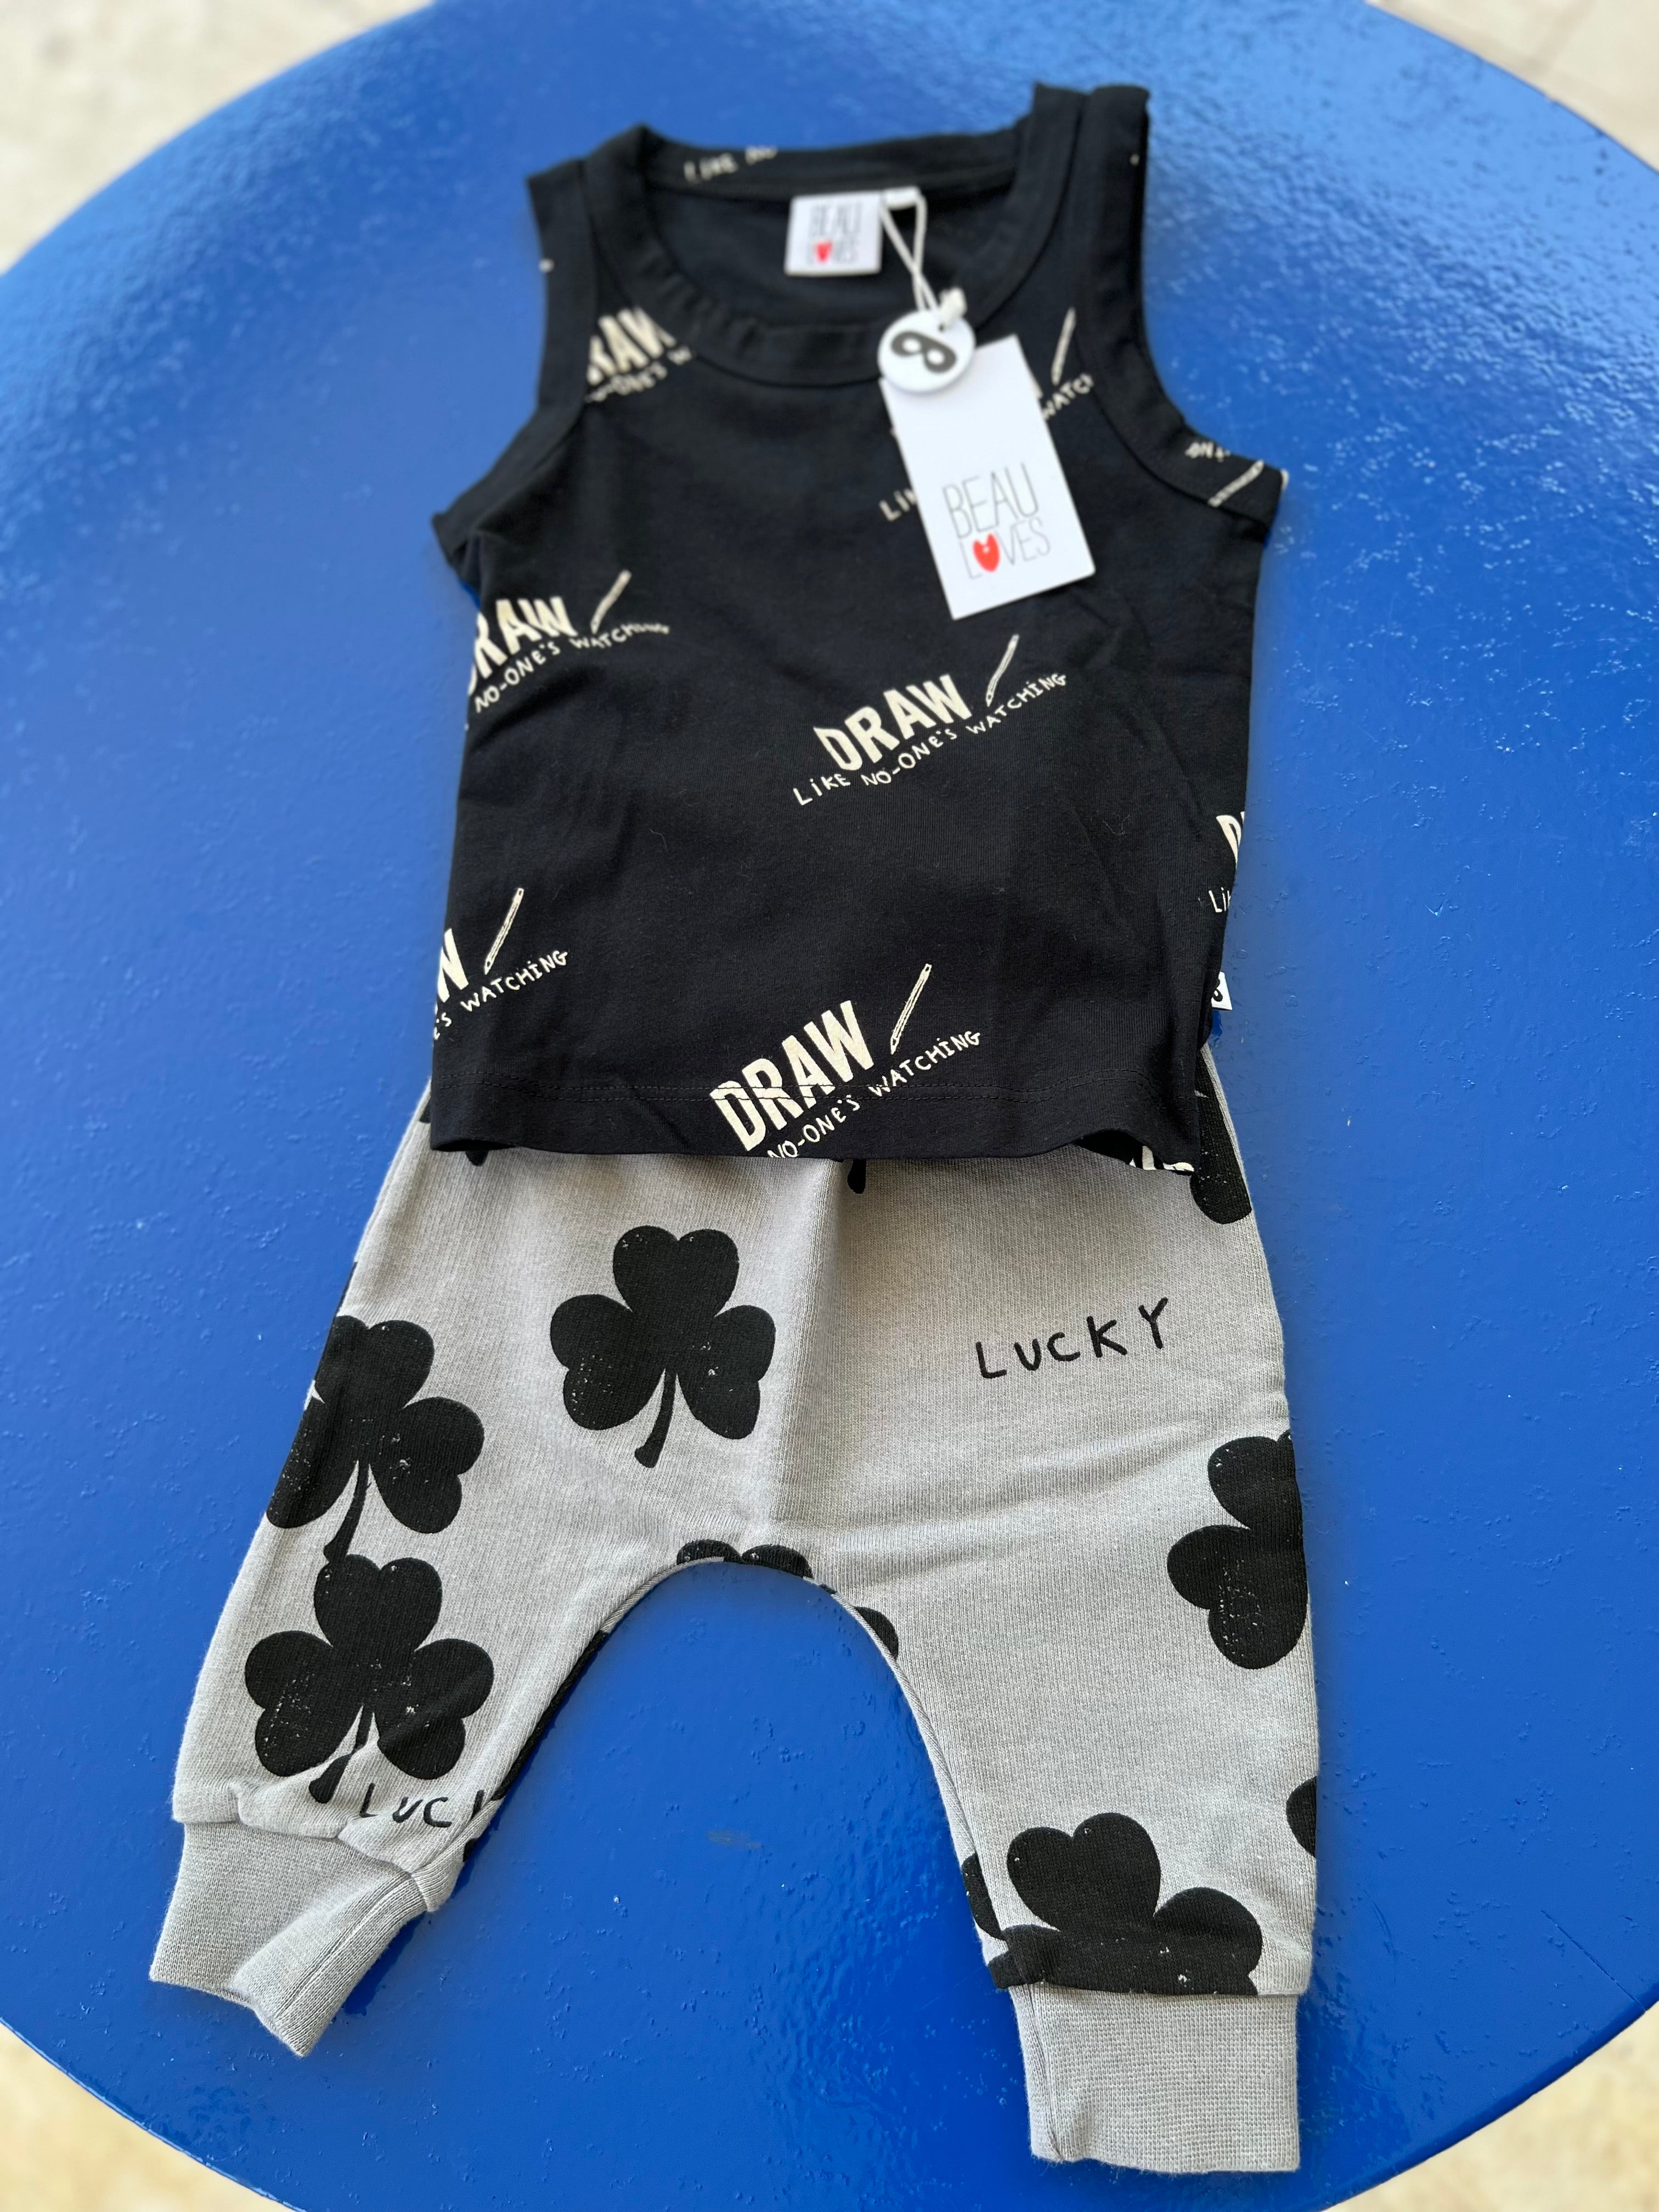 BABY SET 16 : BABY VEST BLACK DRAW + WASHED LUCKY PANT